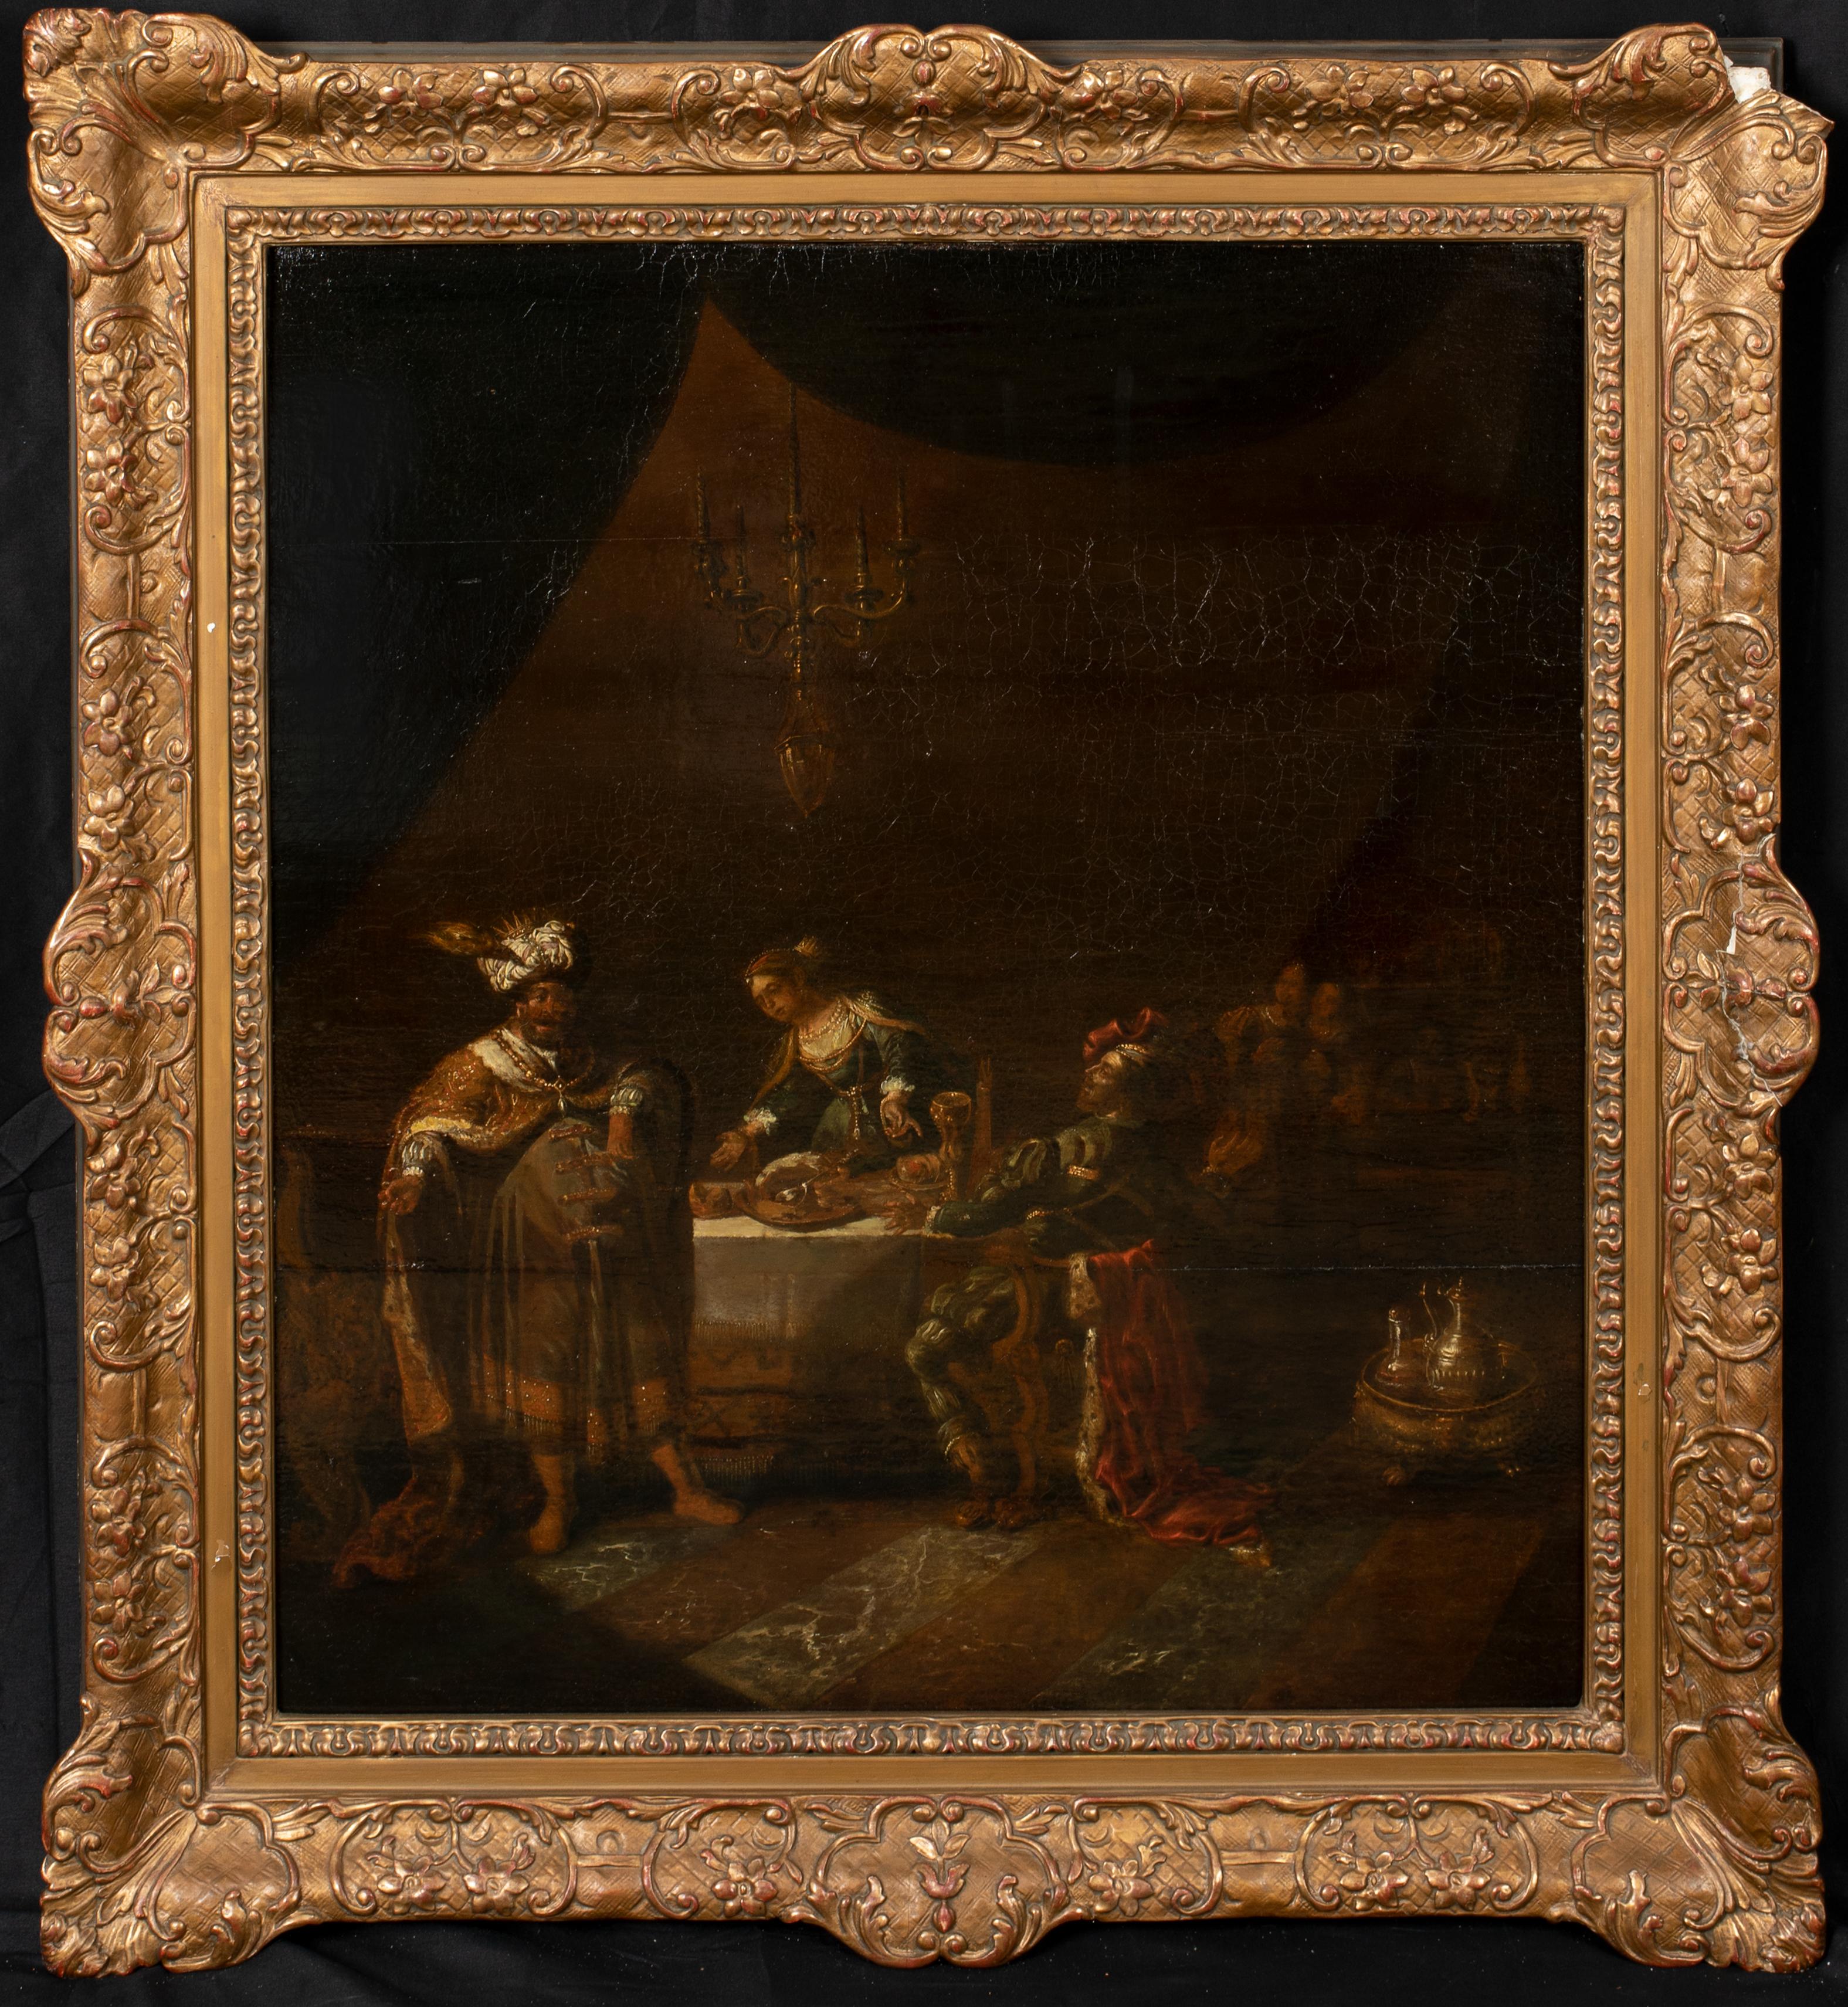 Ahasuerus and Hamas at the Feast of Esther, 17th Century - Painting by Rembrandt van Rijn